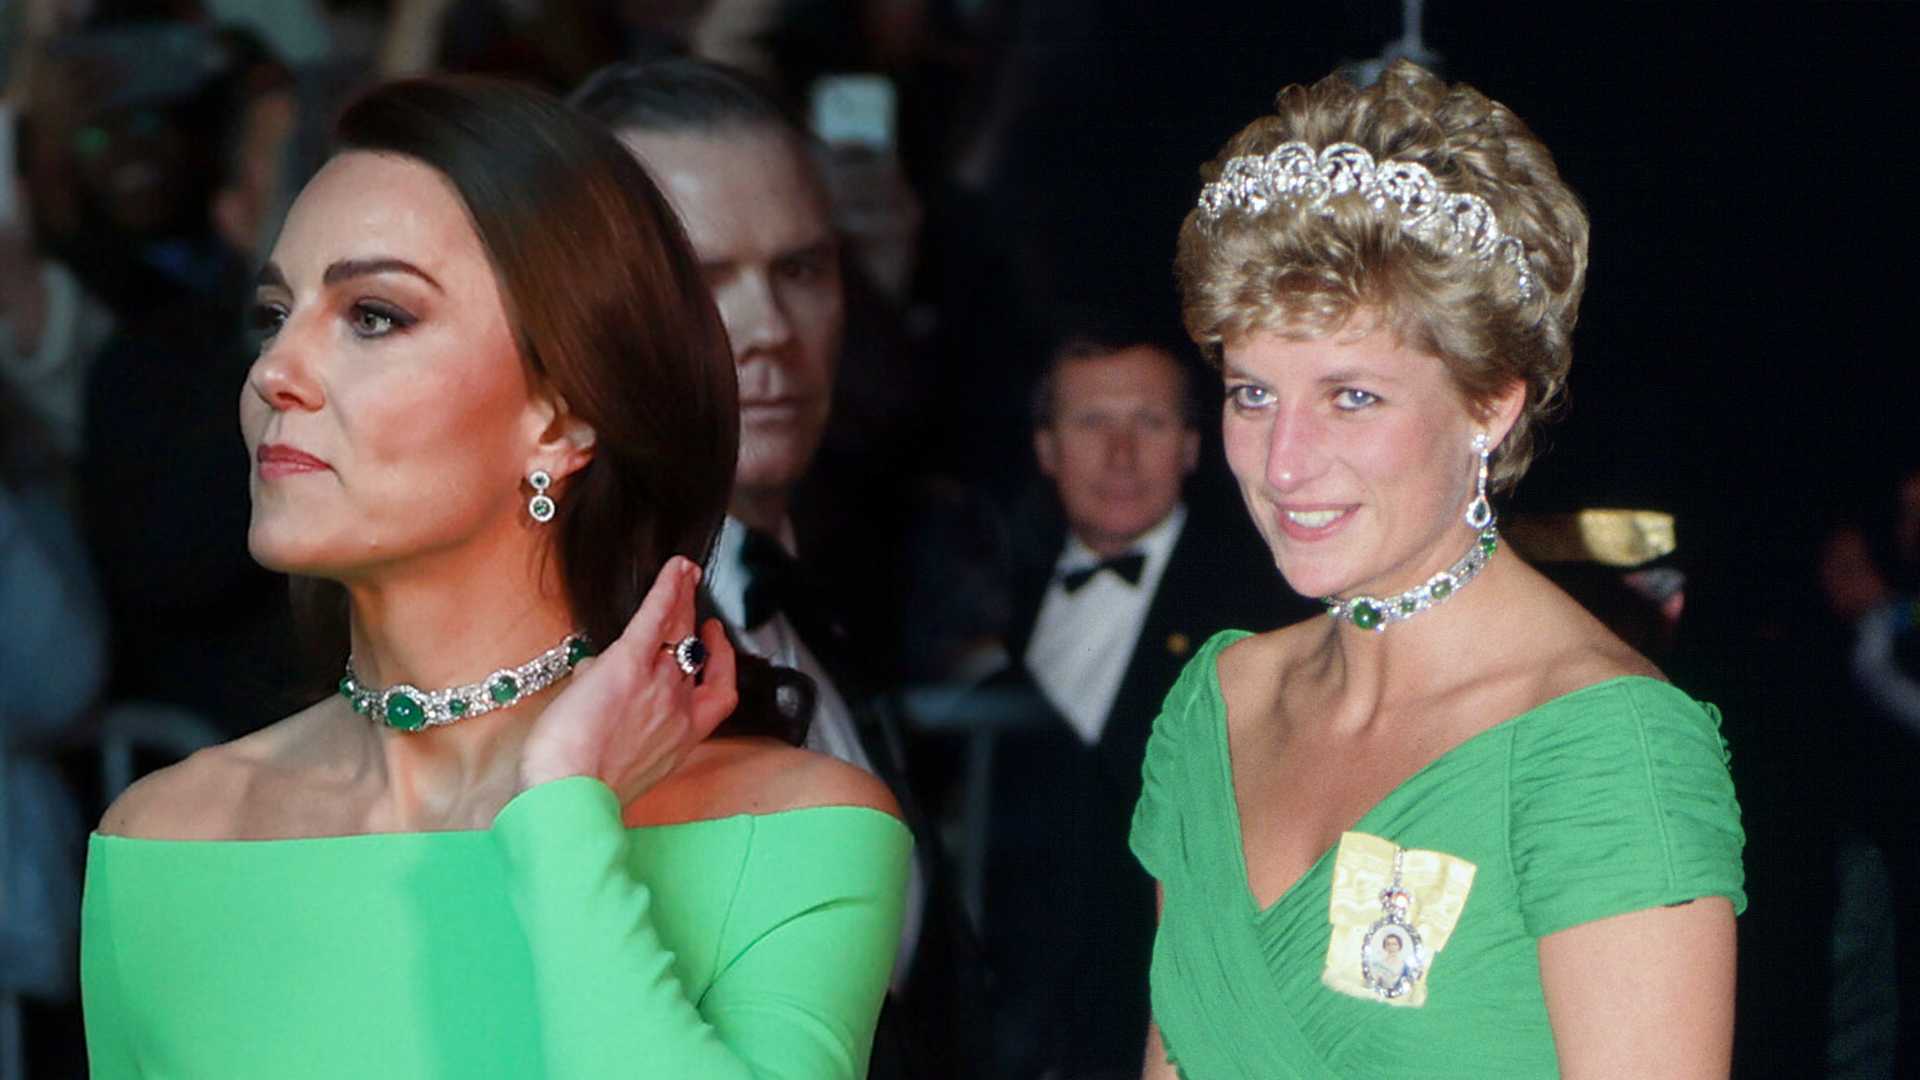 Kate Middleton wears rented gown, Princess Diana’s emerald choker to awards